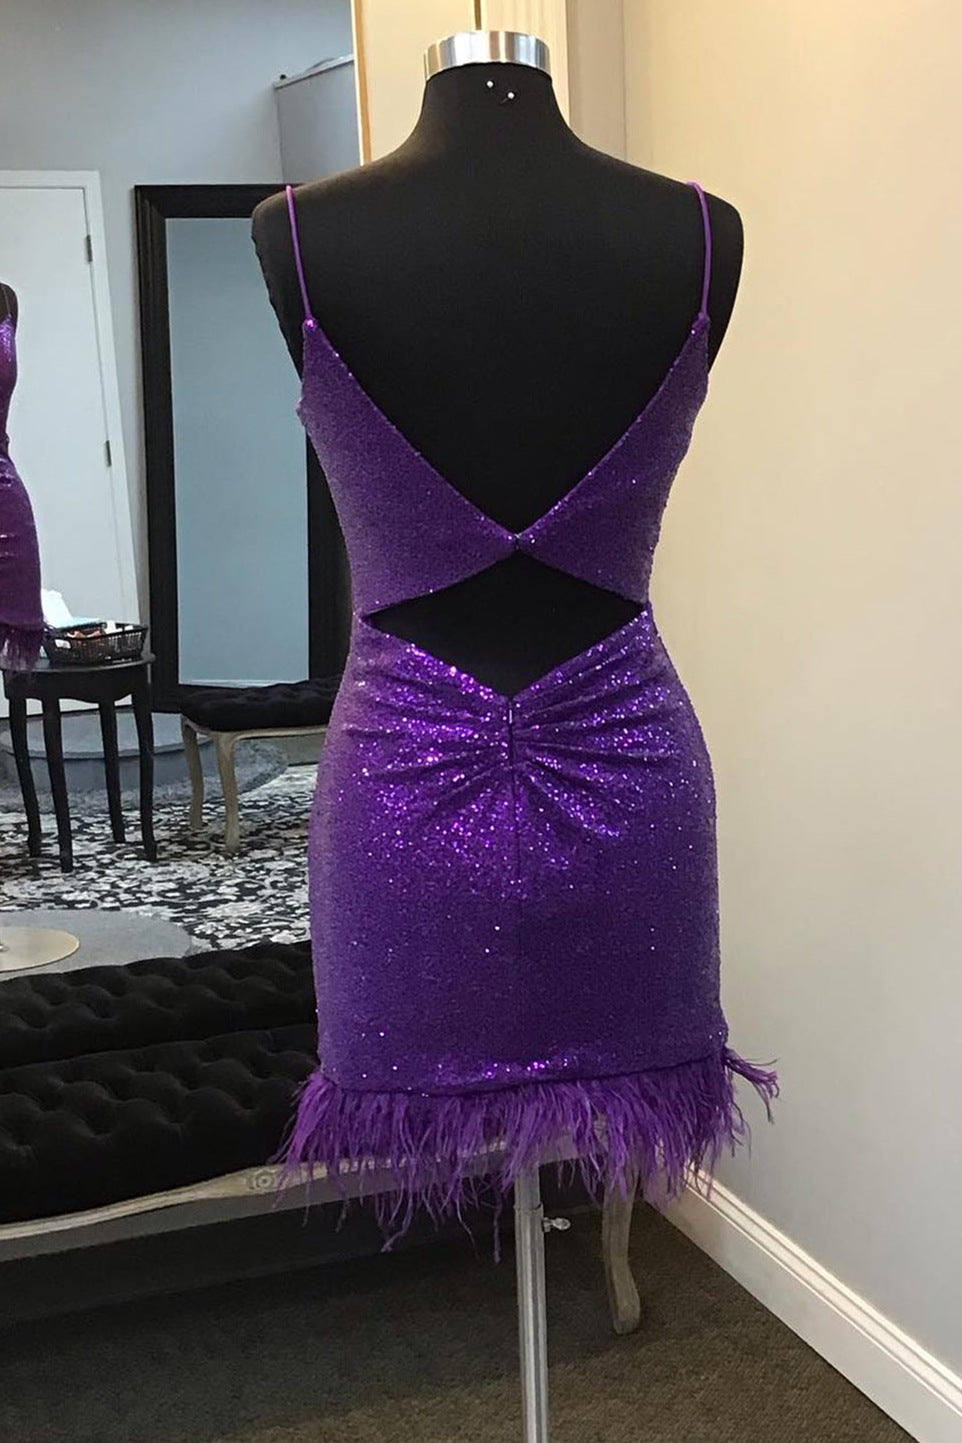 Evening Dresses 3 10 Sleeve, V-Neck Purple Sequins Homecoming Dress with Feather Hem